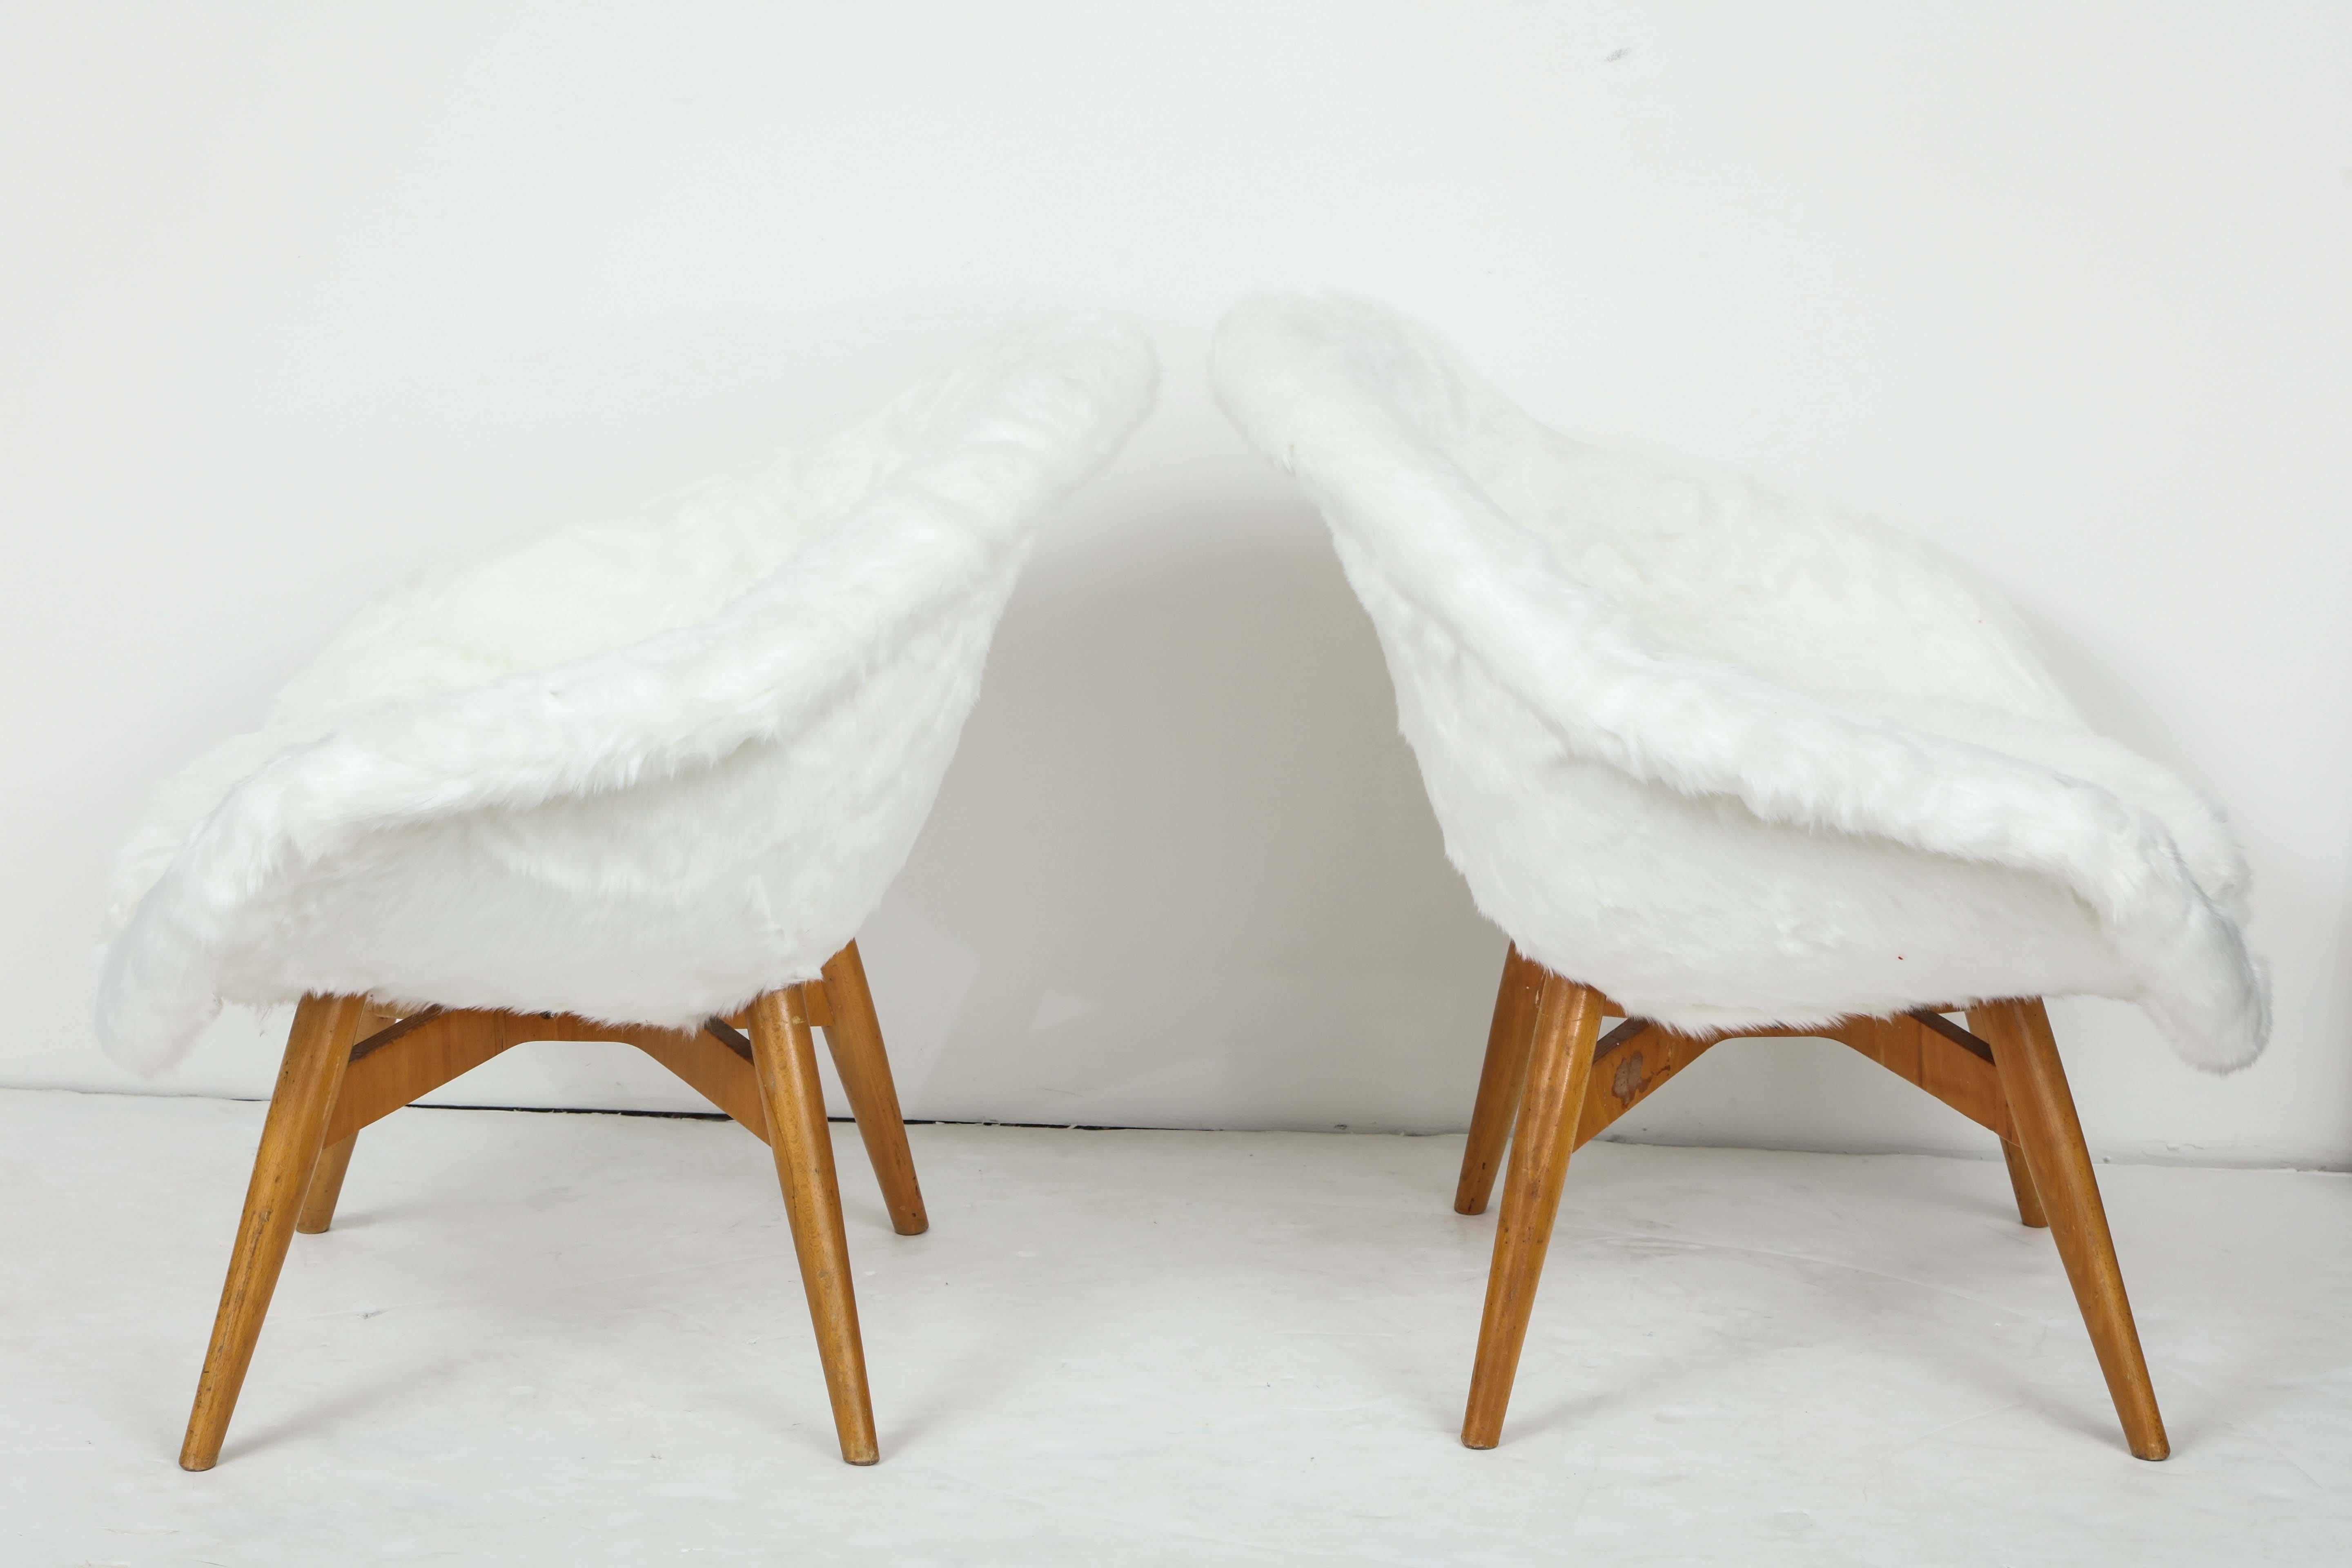 Mid-century chairs designed by Miroslav Navratil, a Czech designer in the 1960s.
The legs are in wood and the entire seat has been recovered with white faux fur